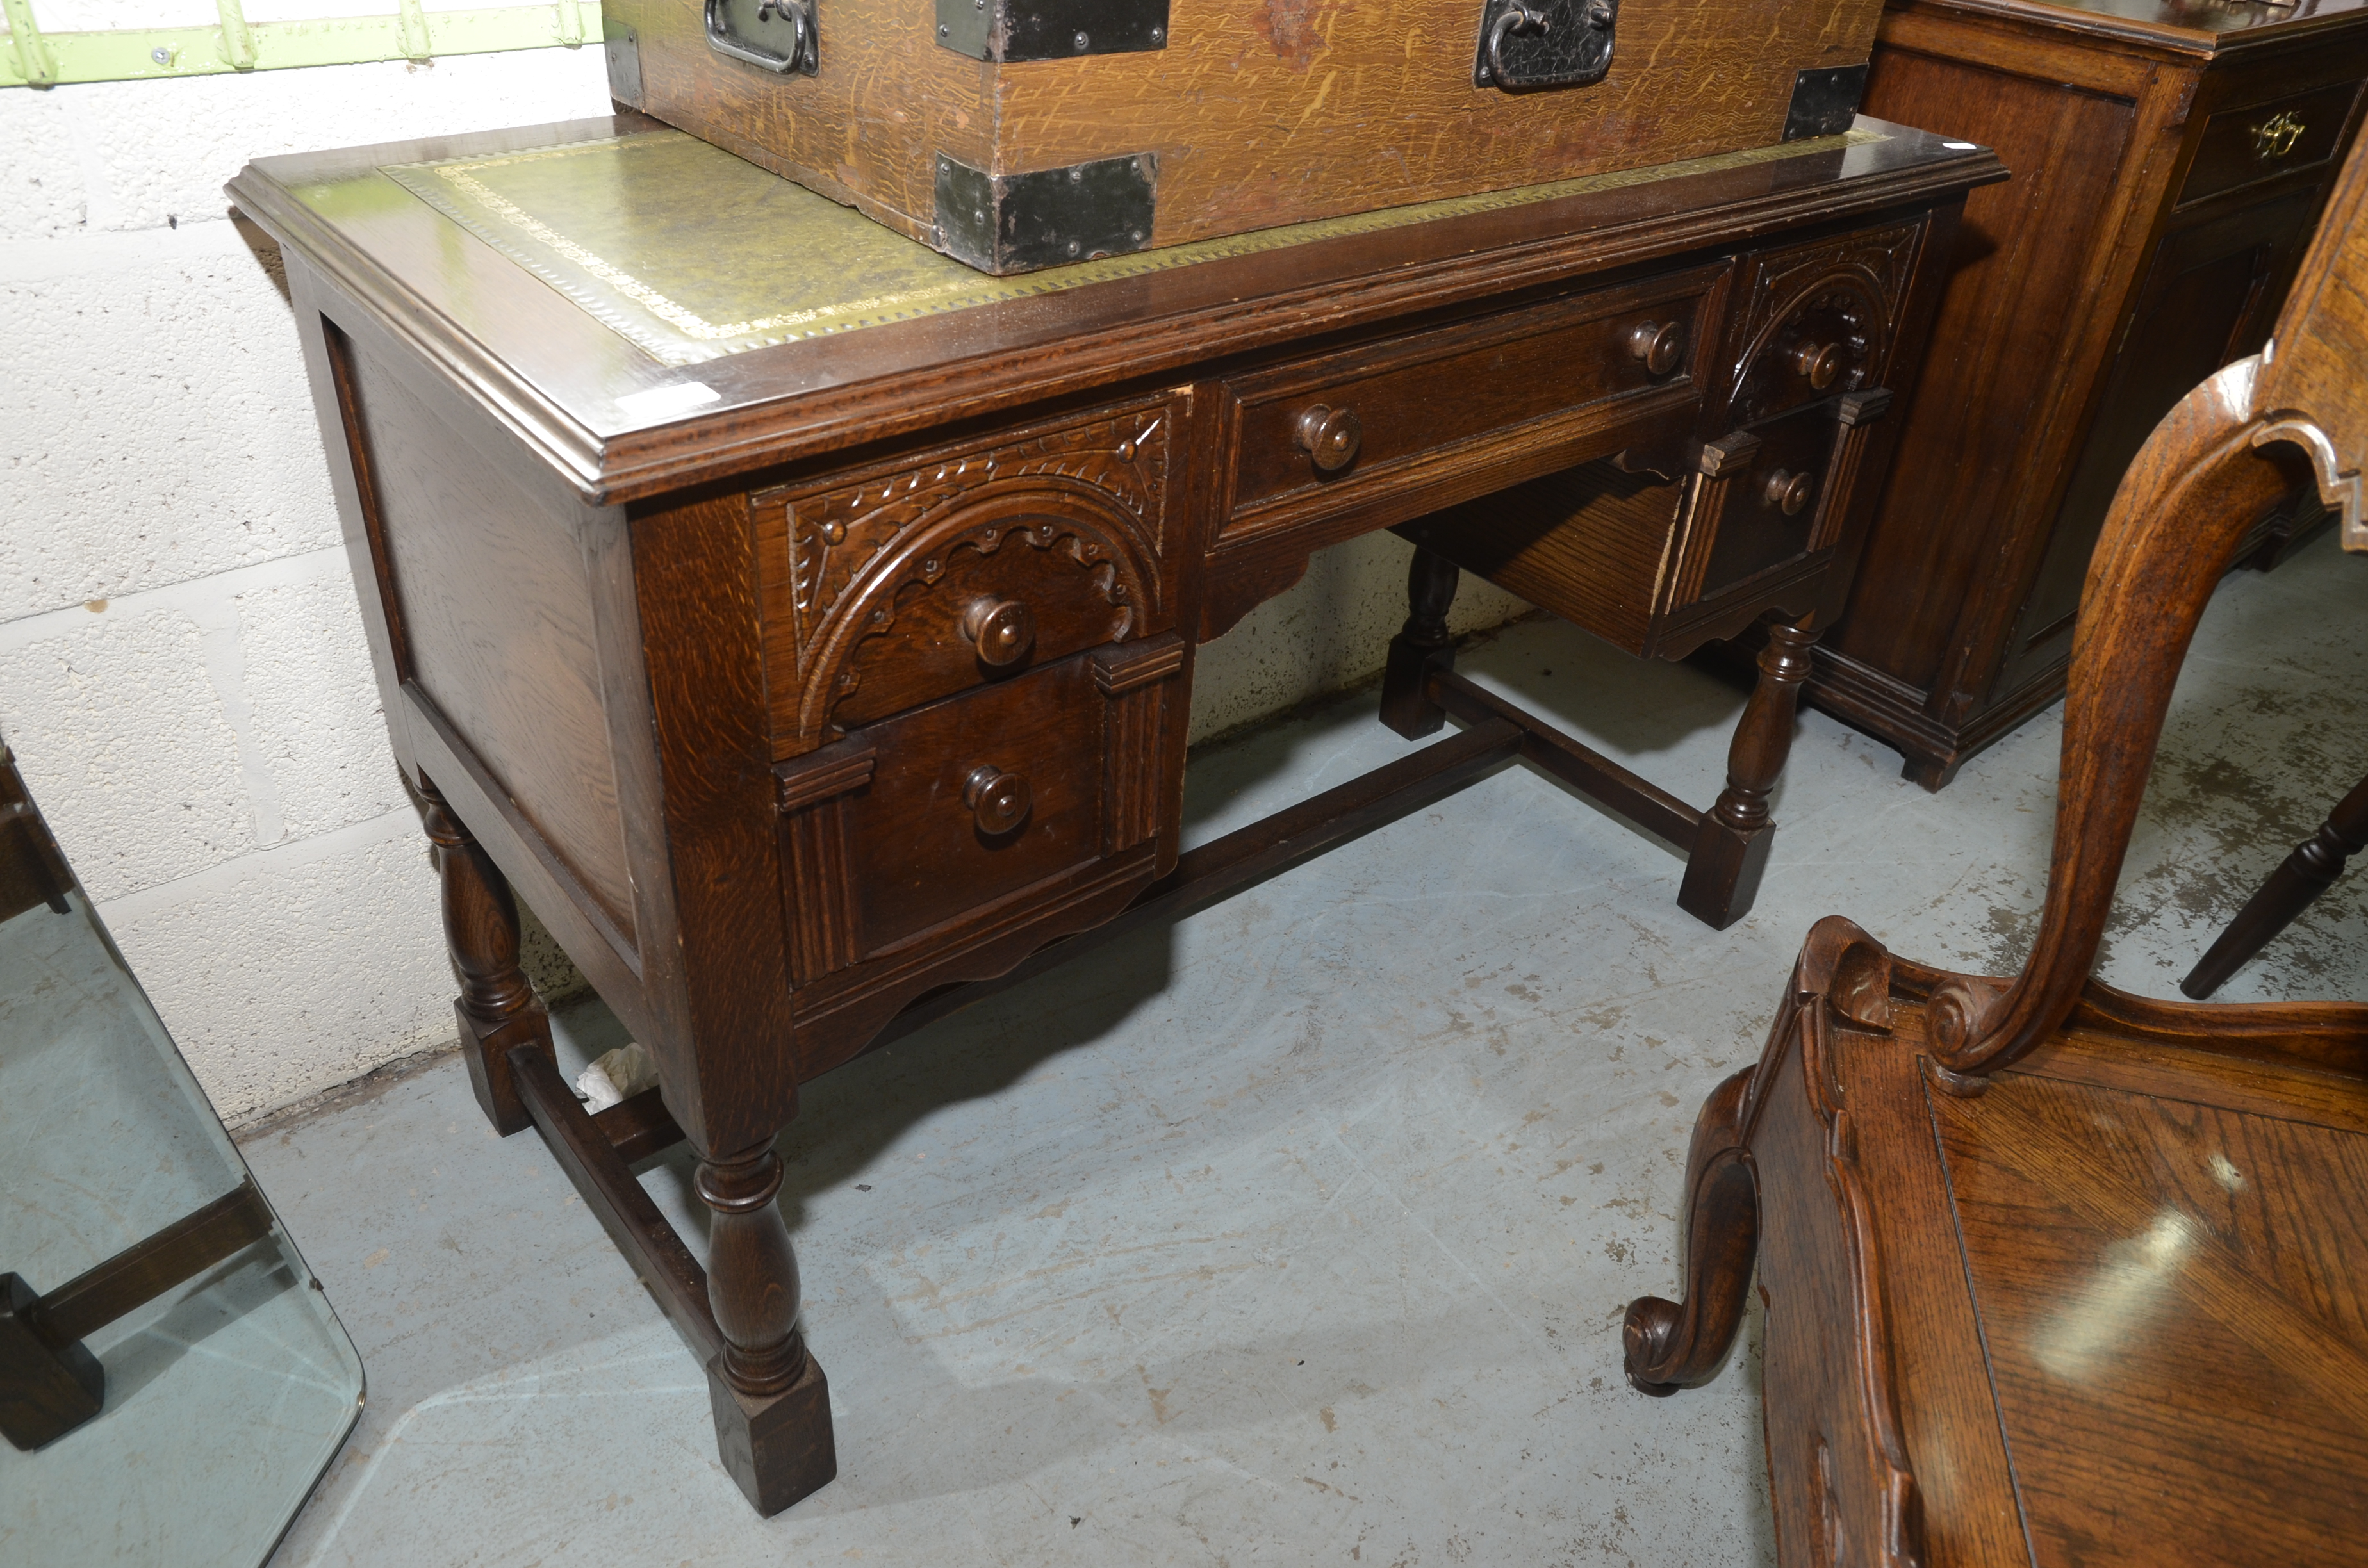 Oak knee hole desk with leather inset top